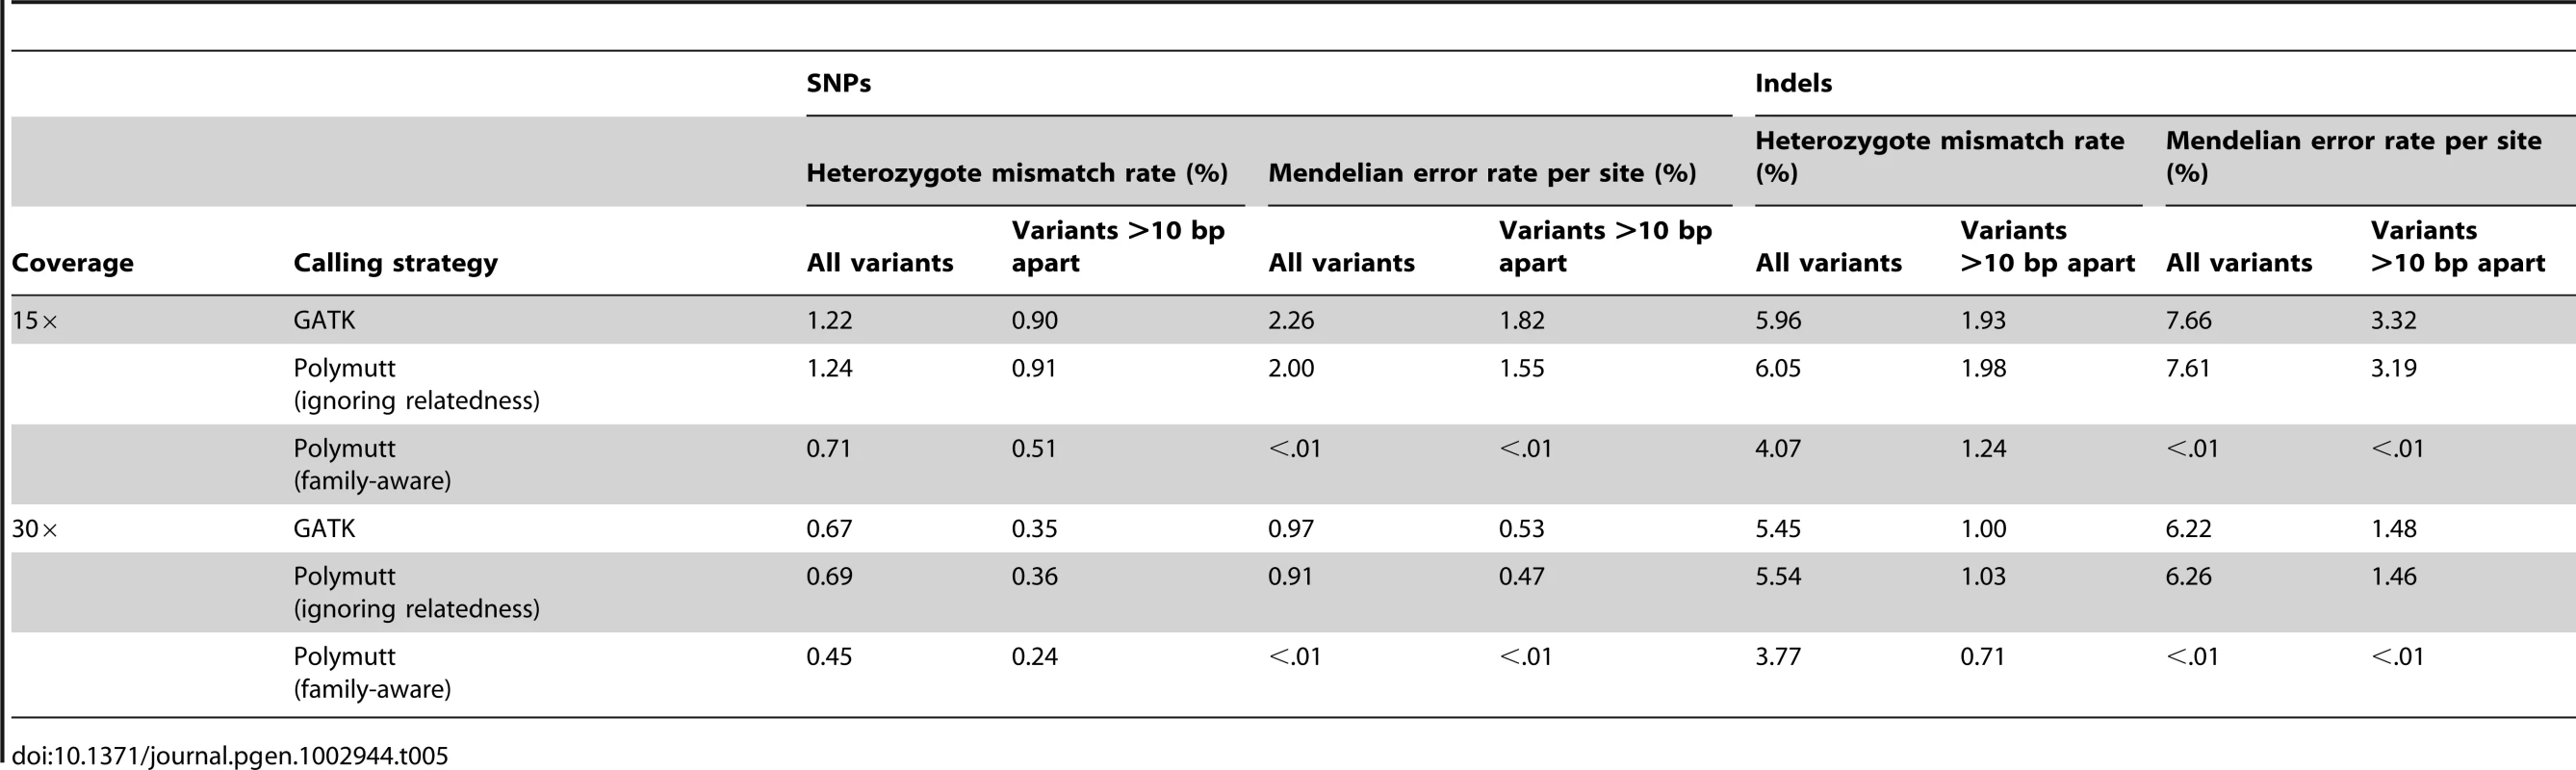 Heterozygous mismatch rates (%) and Mendelian inconsistency rates (%) per site of call sets generated by PolyMutt (family-aware) and the standard approaches using PolyMutt (ignoring relatedness) and GATK from empirically calibrated alignments of simulated reads with base quality of Q20 in the pedigree shown in &lt;em class=&quot;ref&quot;&gt;Figure 1&lt;/em&gt;.